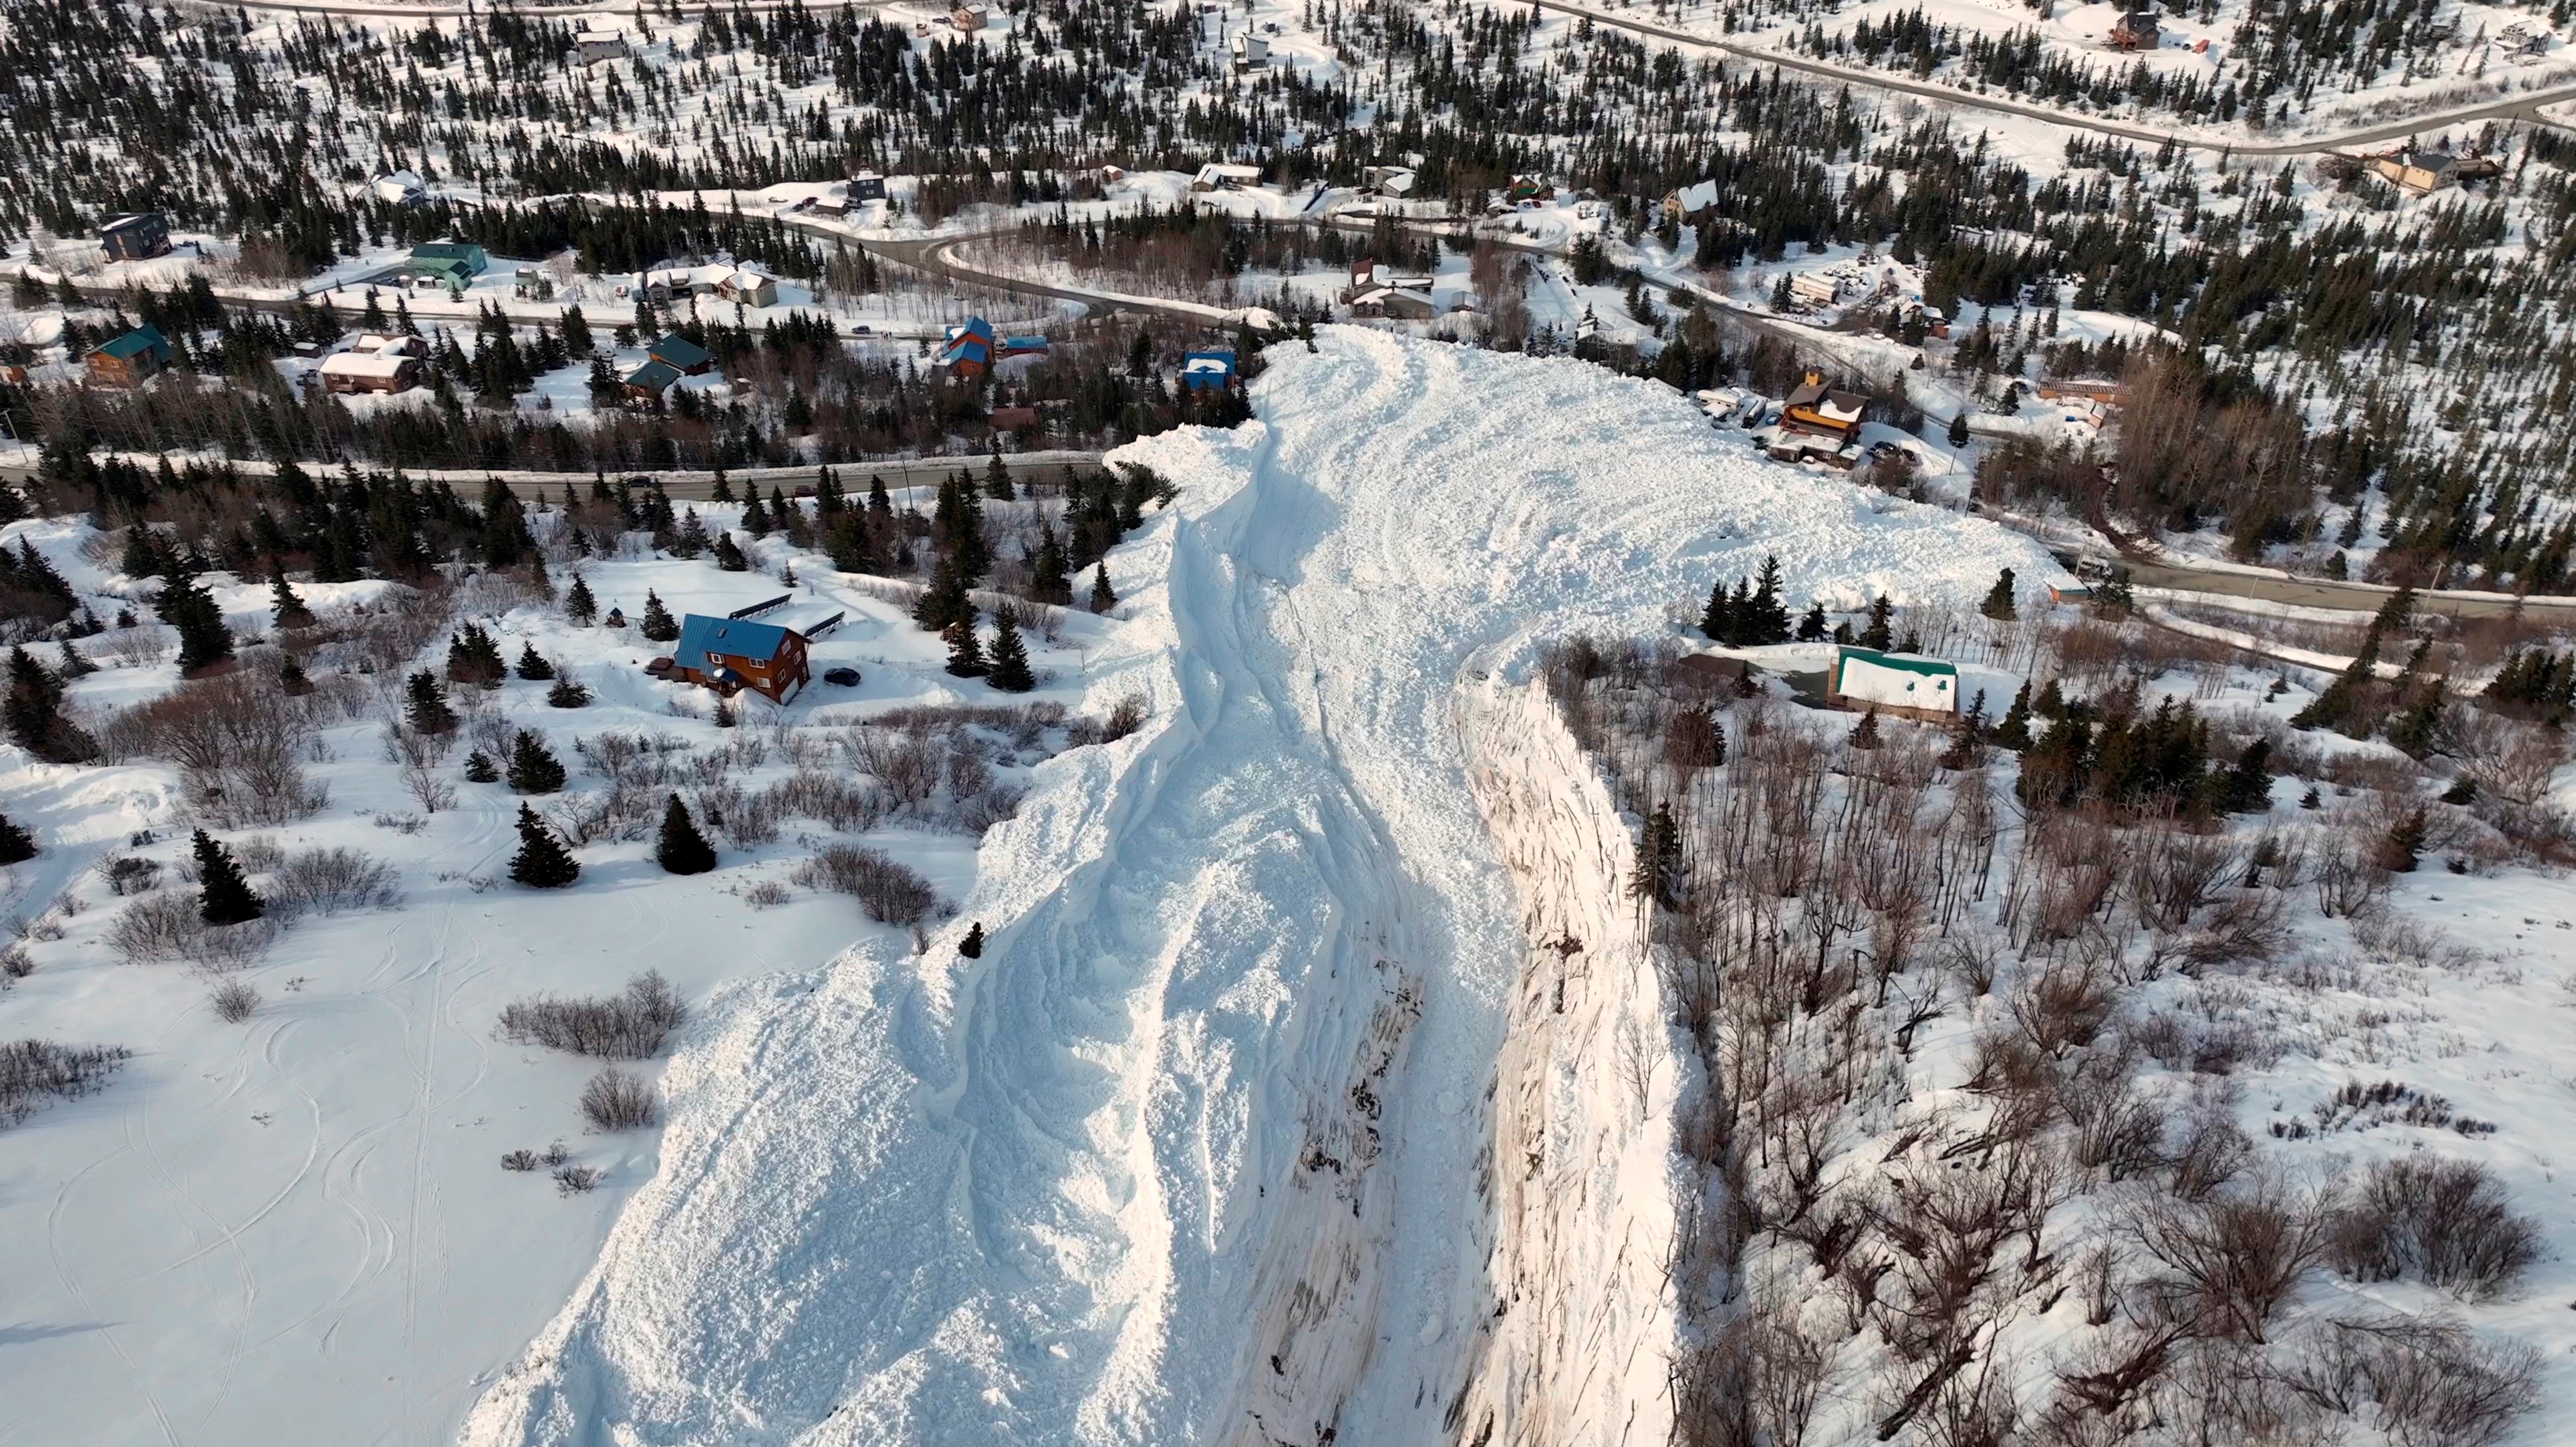 The aftermath of an avalanche down a mountainside at Hiland Road in Anchorage, Alaska